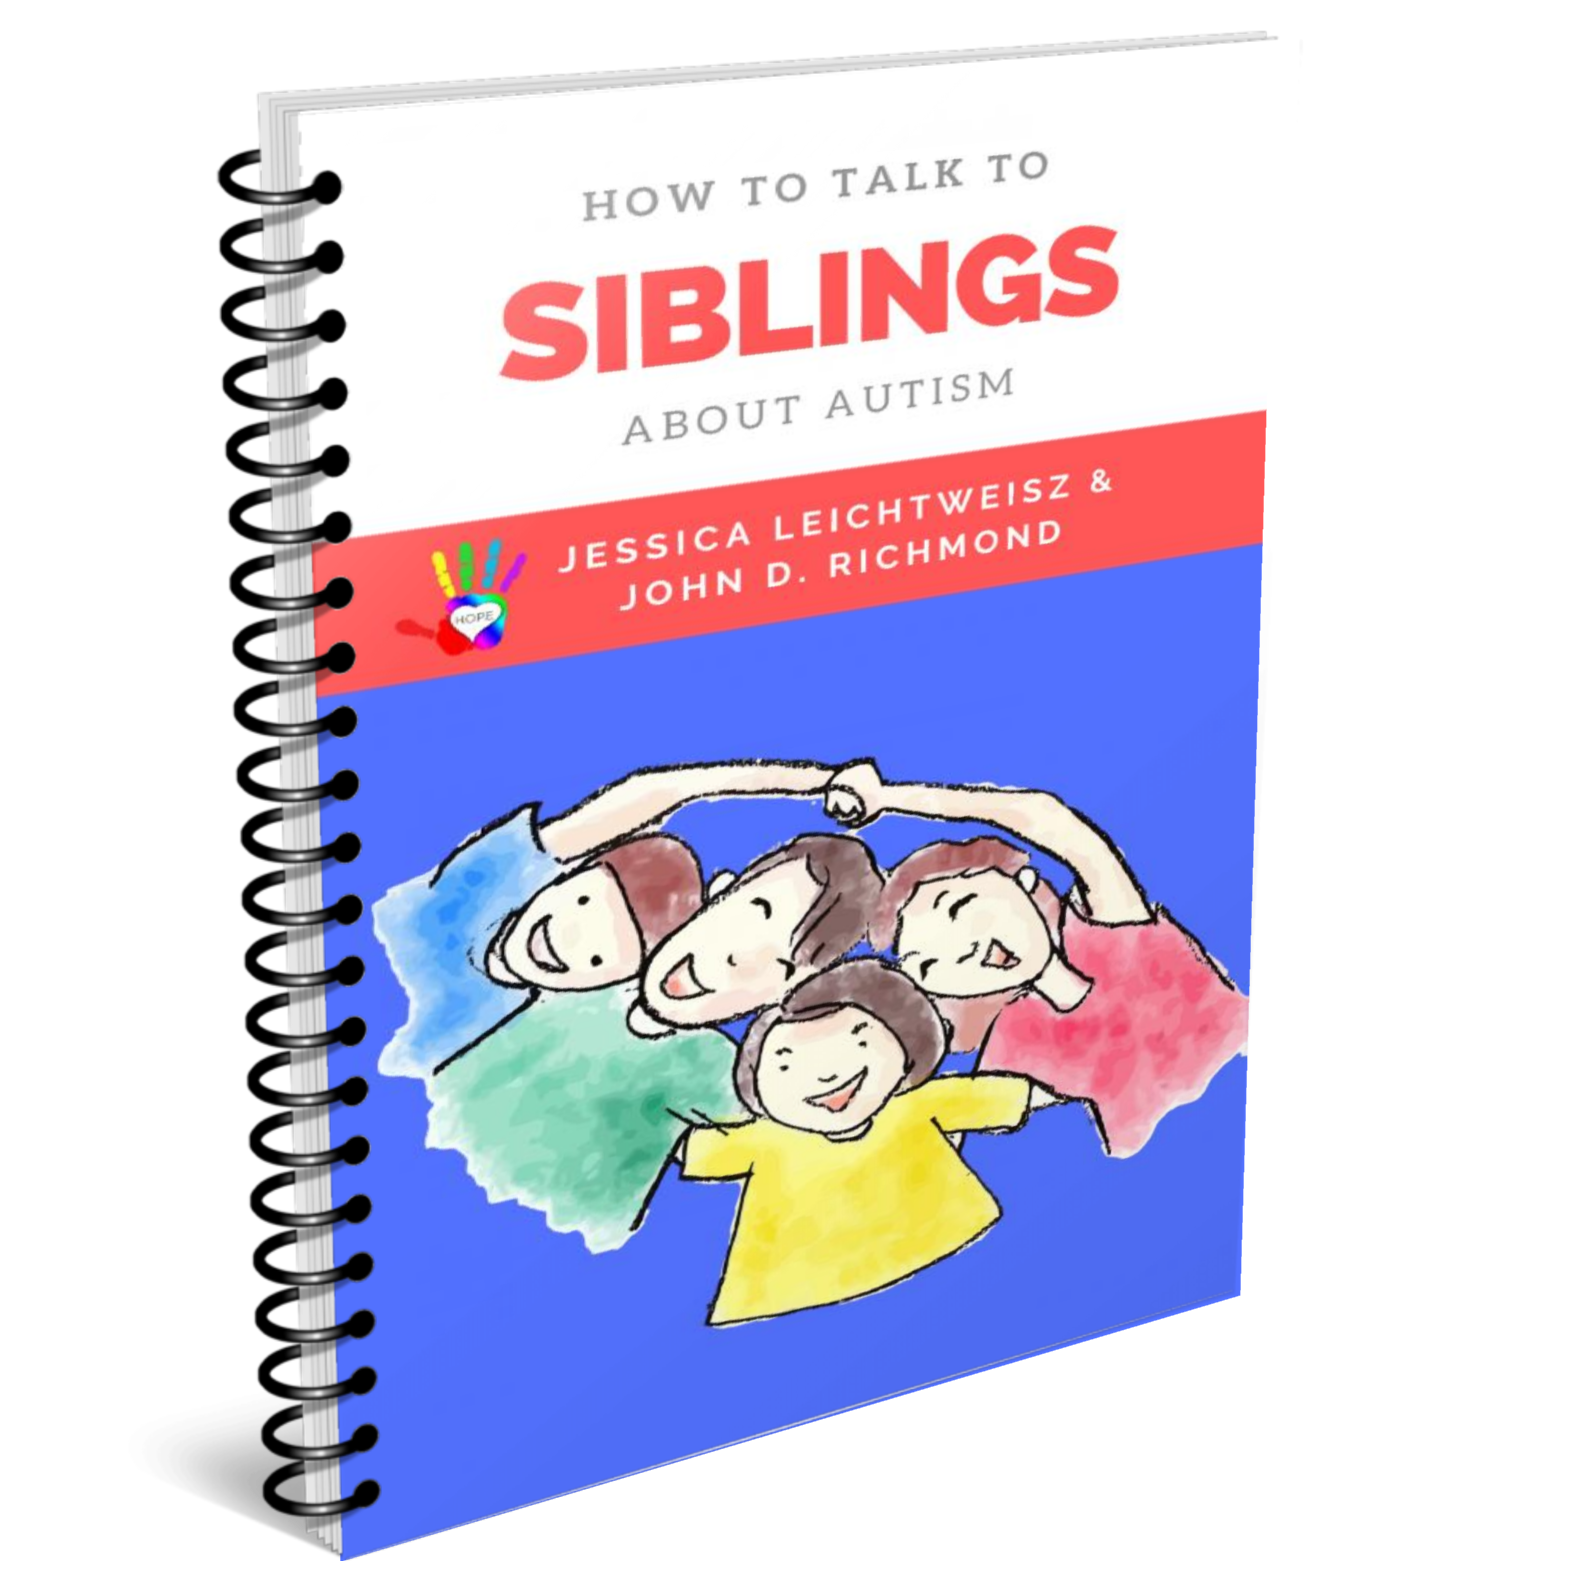 How to Talk to Siblings About Autism